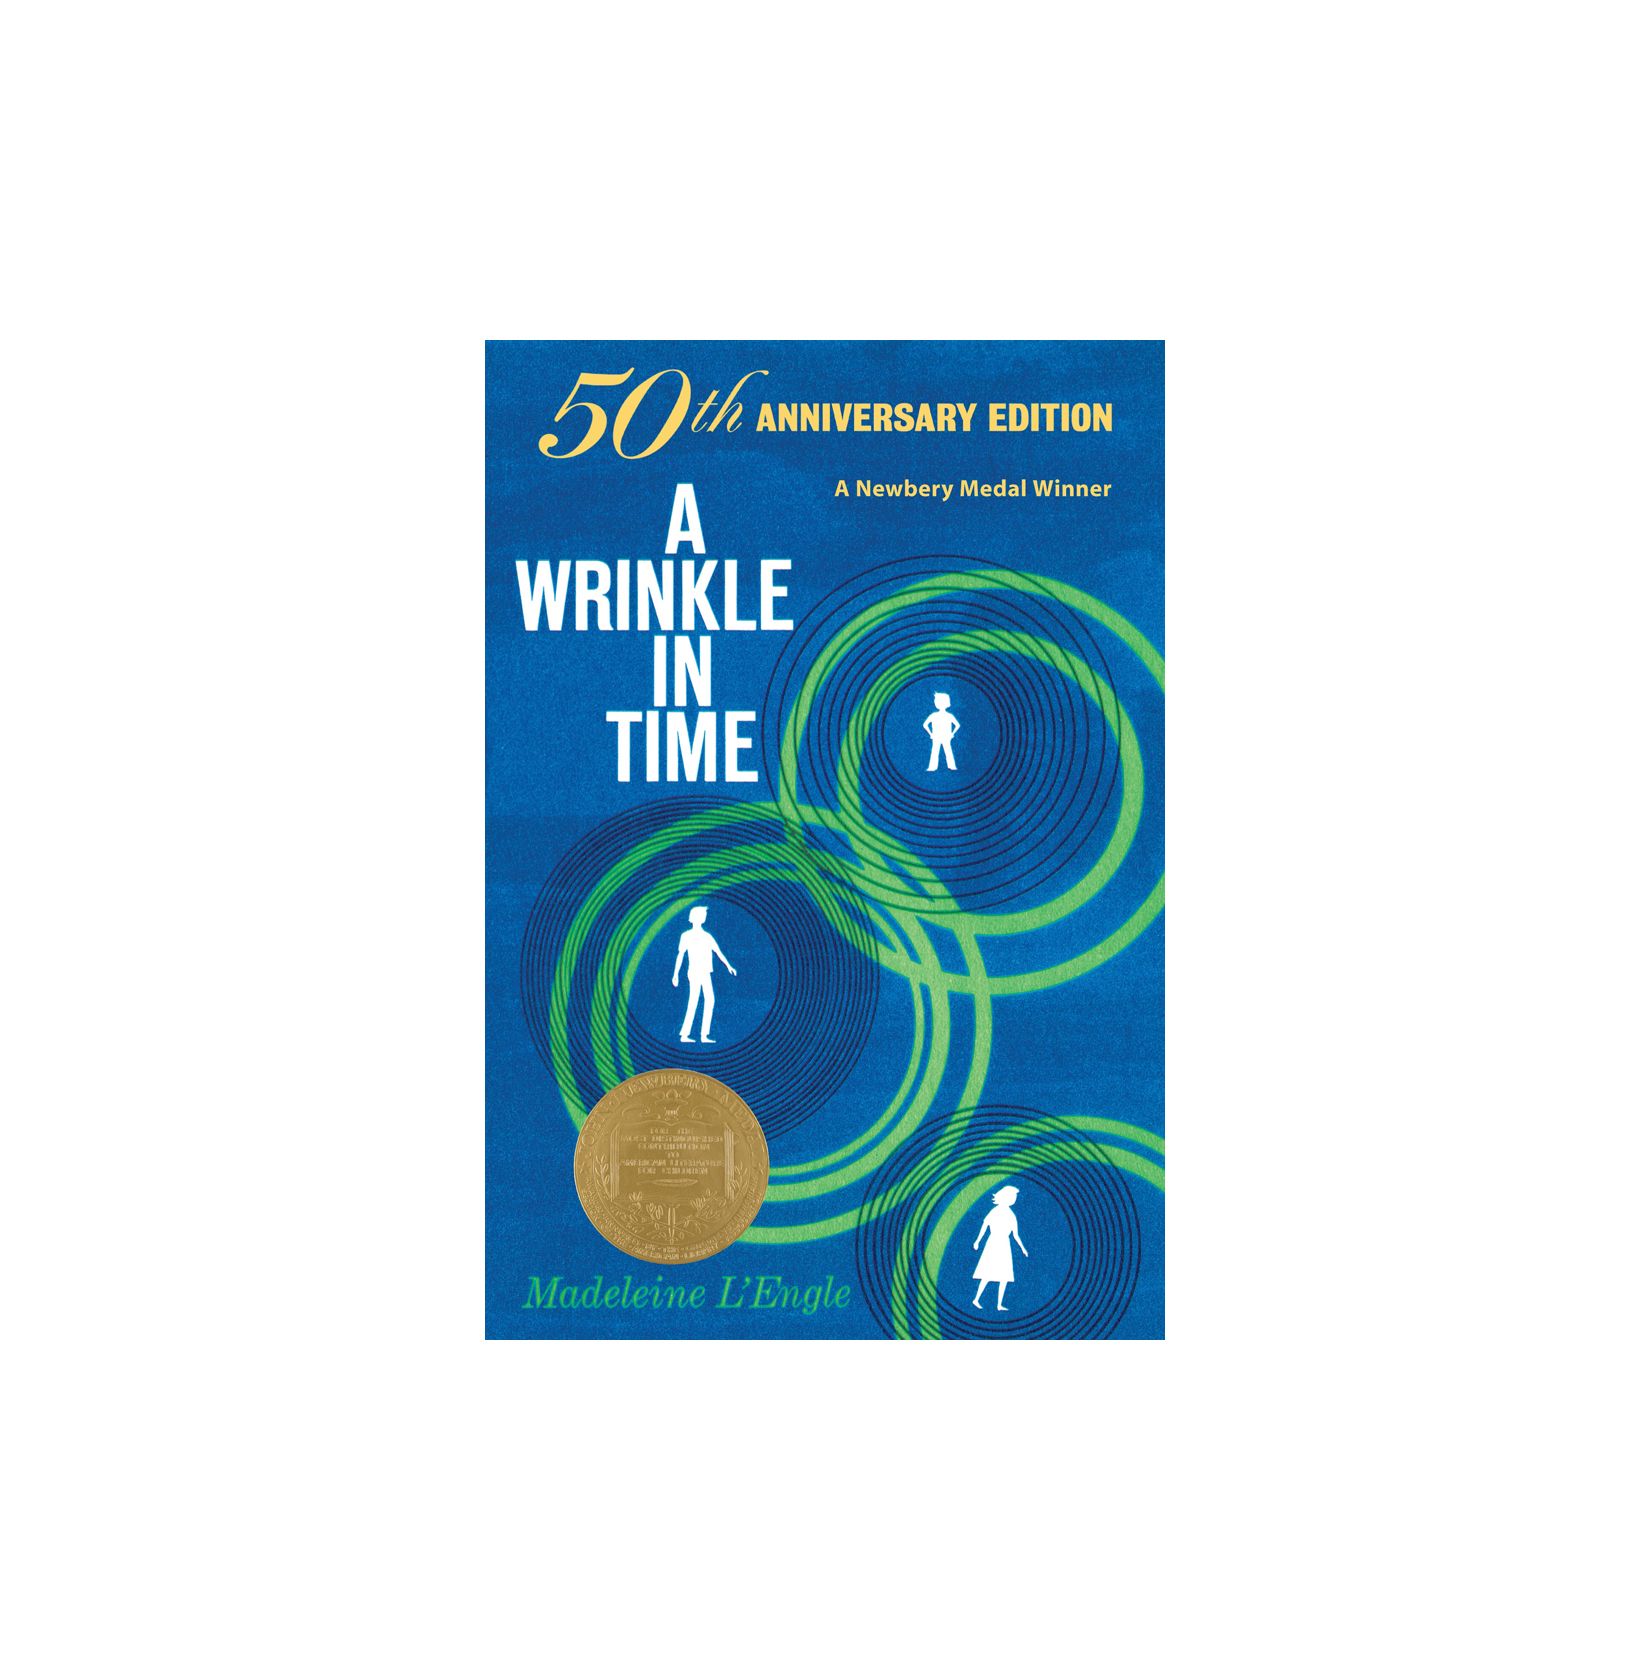 A Wrinkle in Time, le Madeleine L’Engle